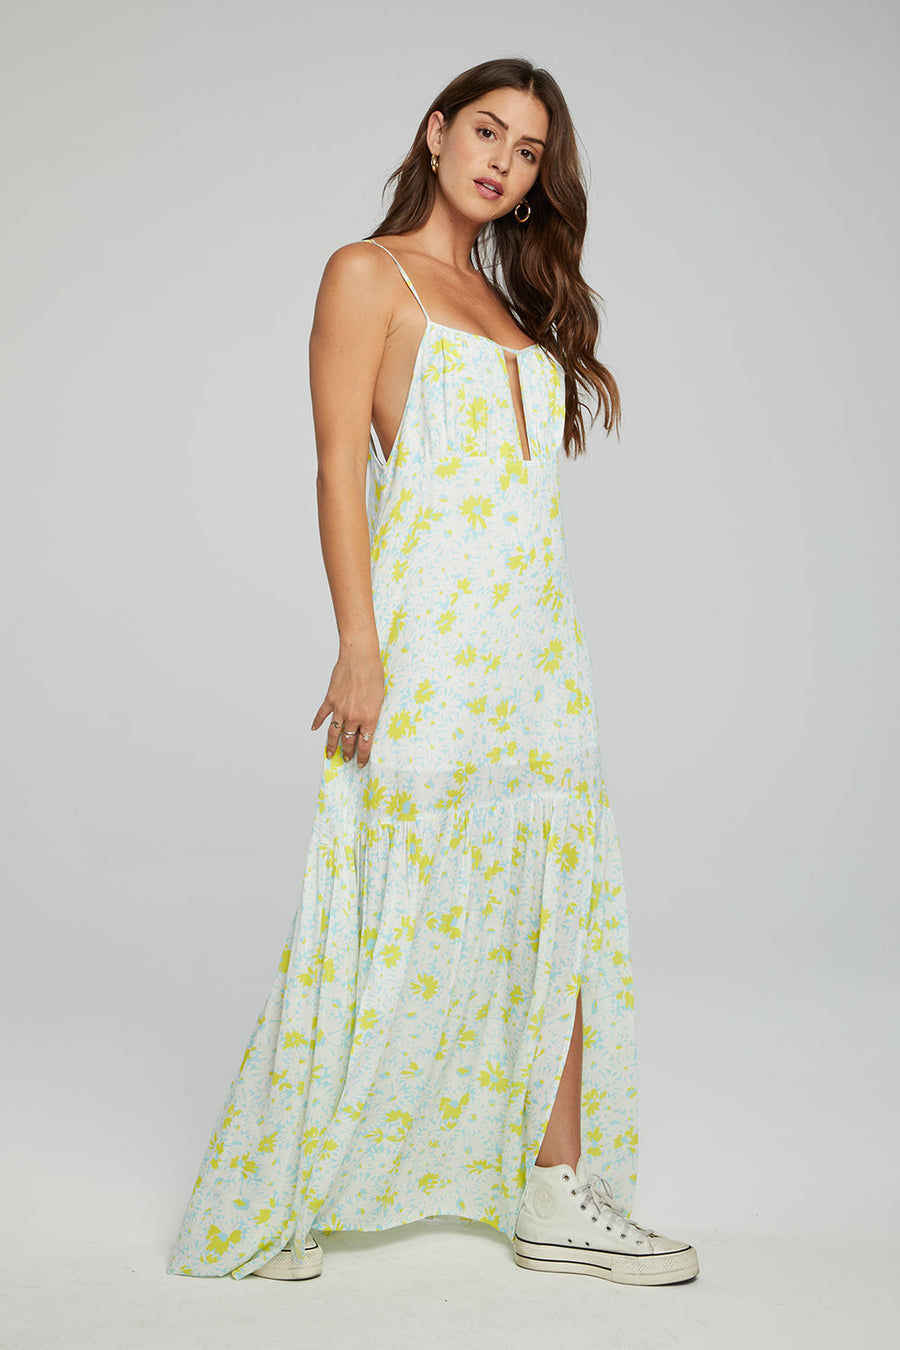 Seren Maxi Dress - Baby Blue Daisy Floral WOMENS chaserbrand